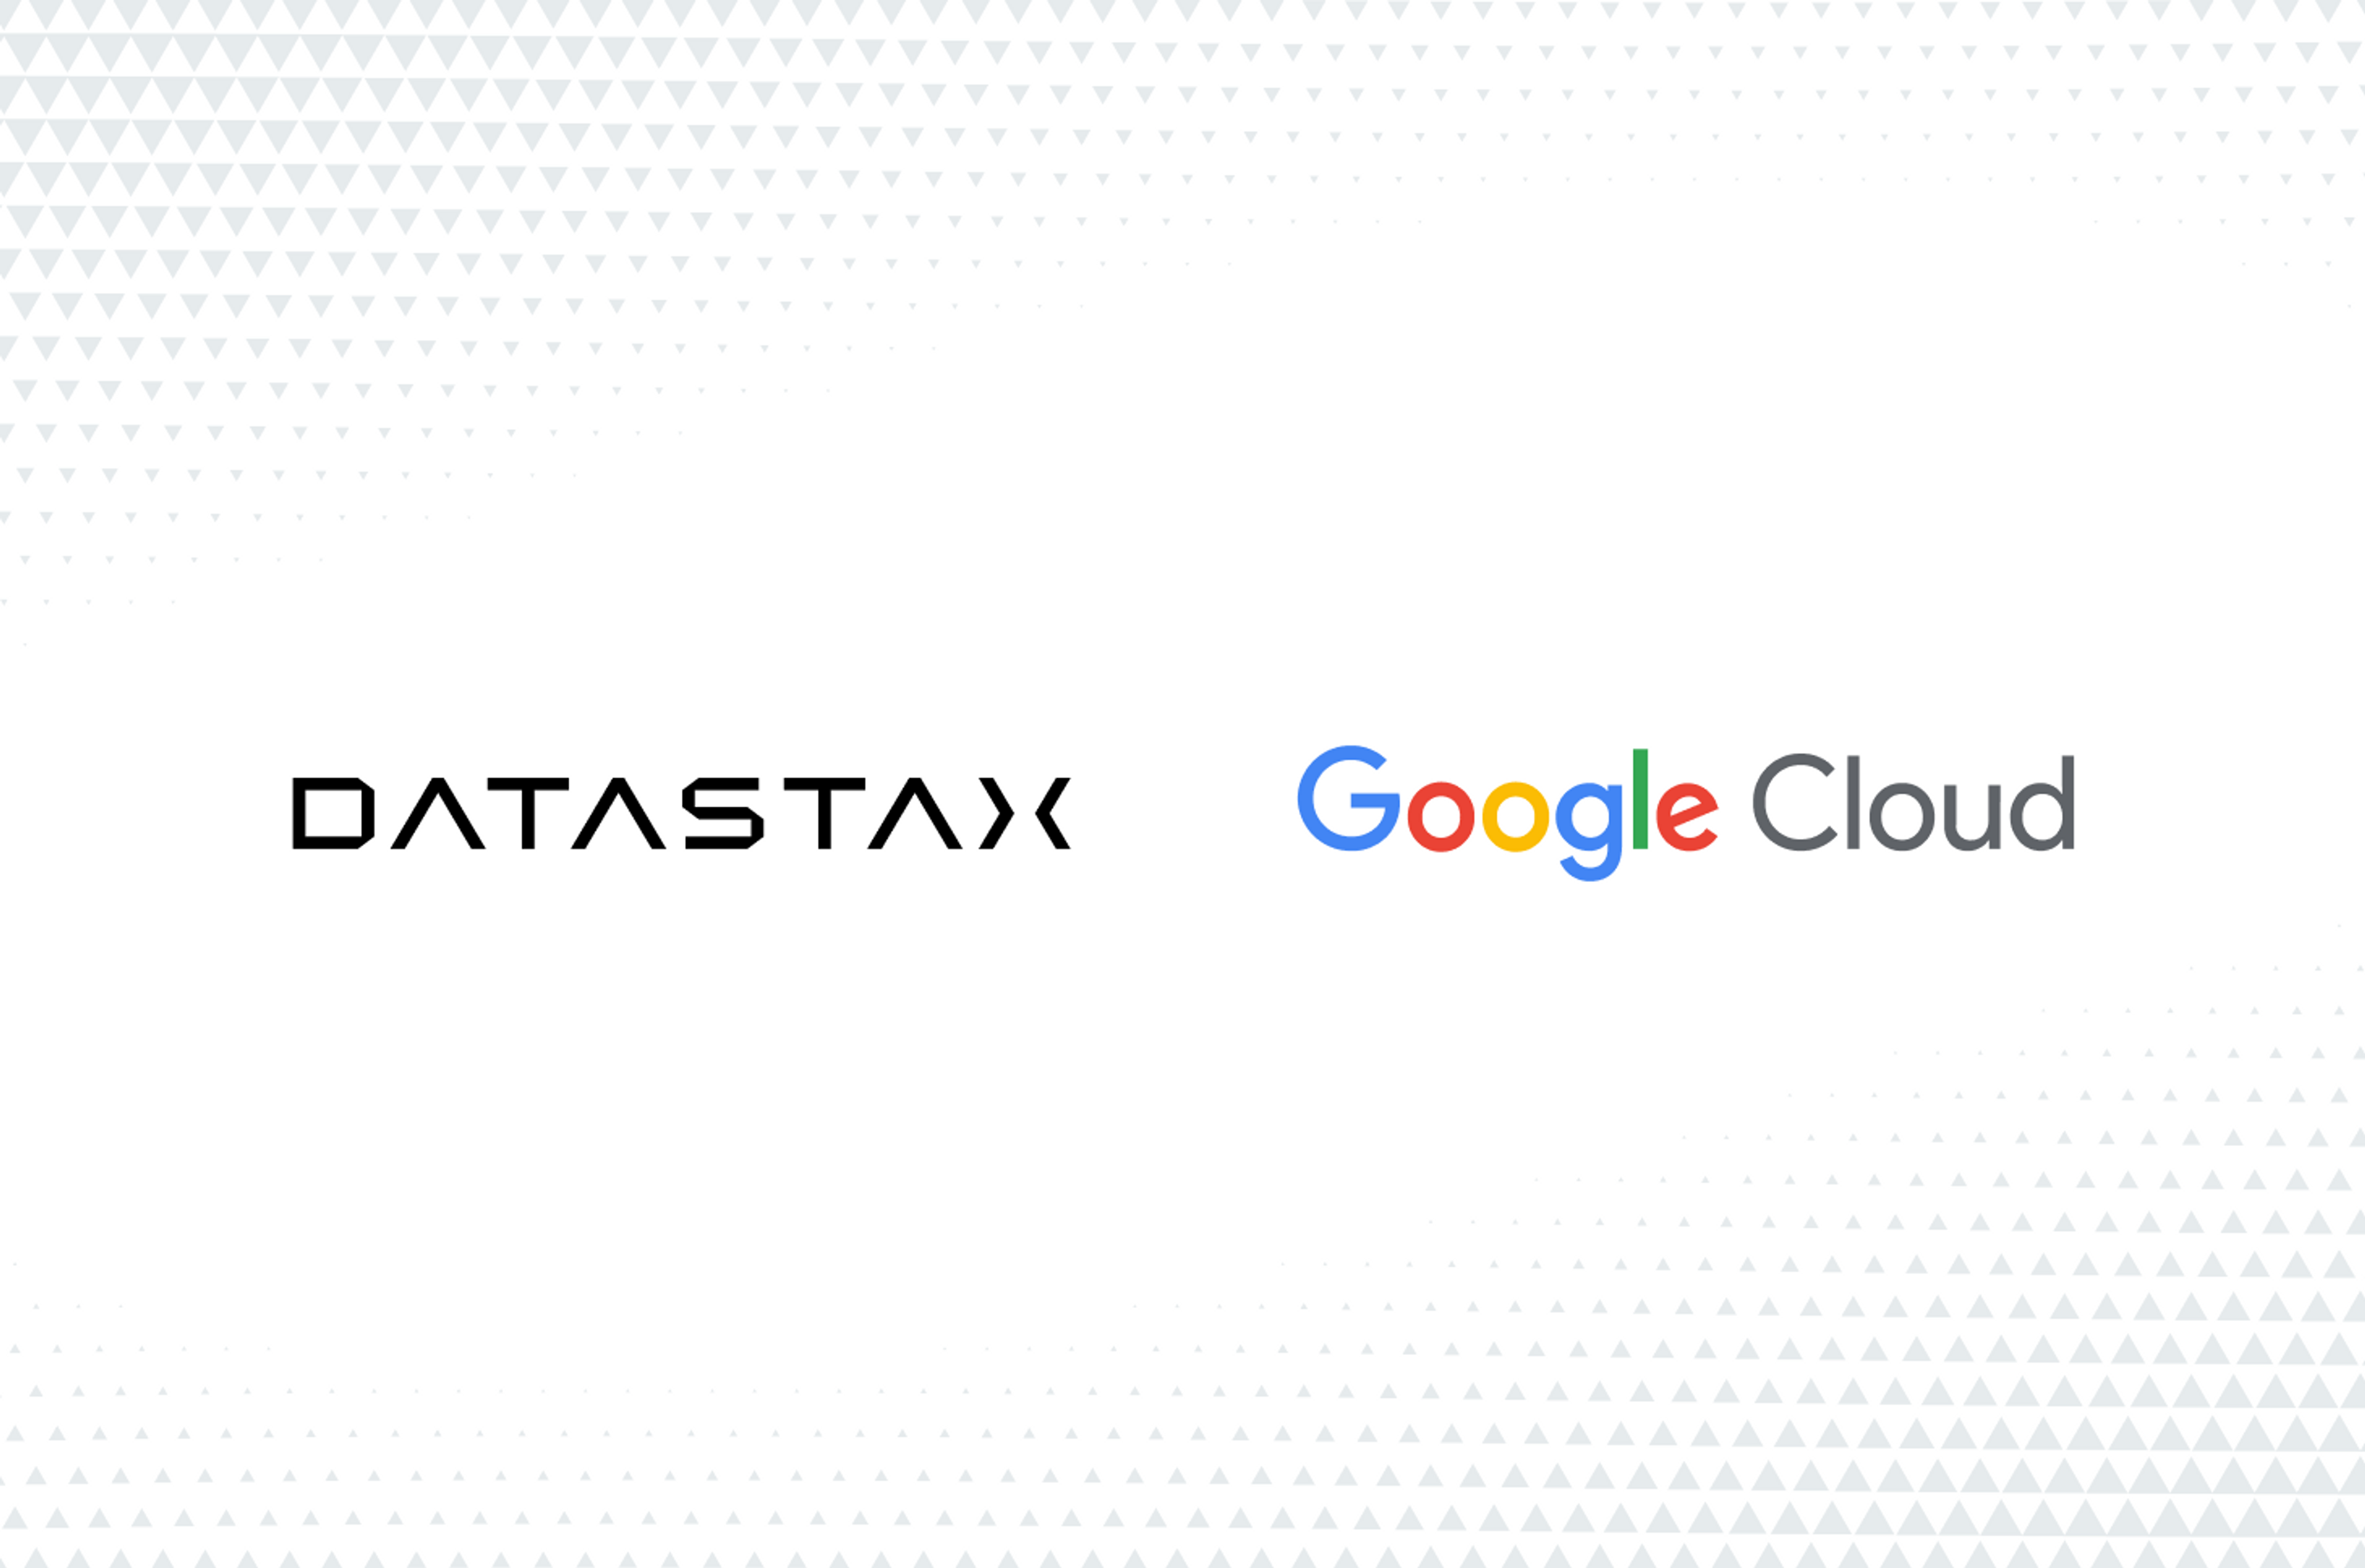 Keeping the Momentum Rolling with Google Cloud